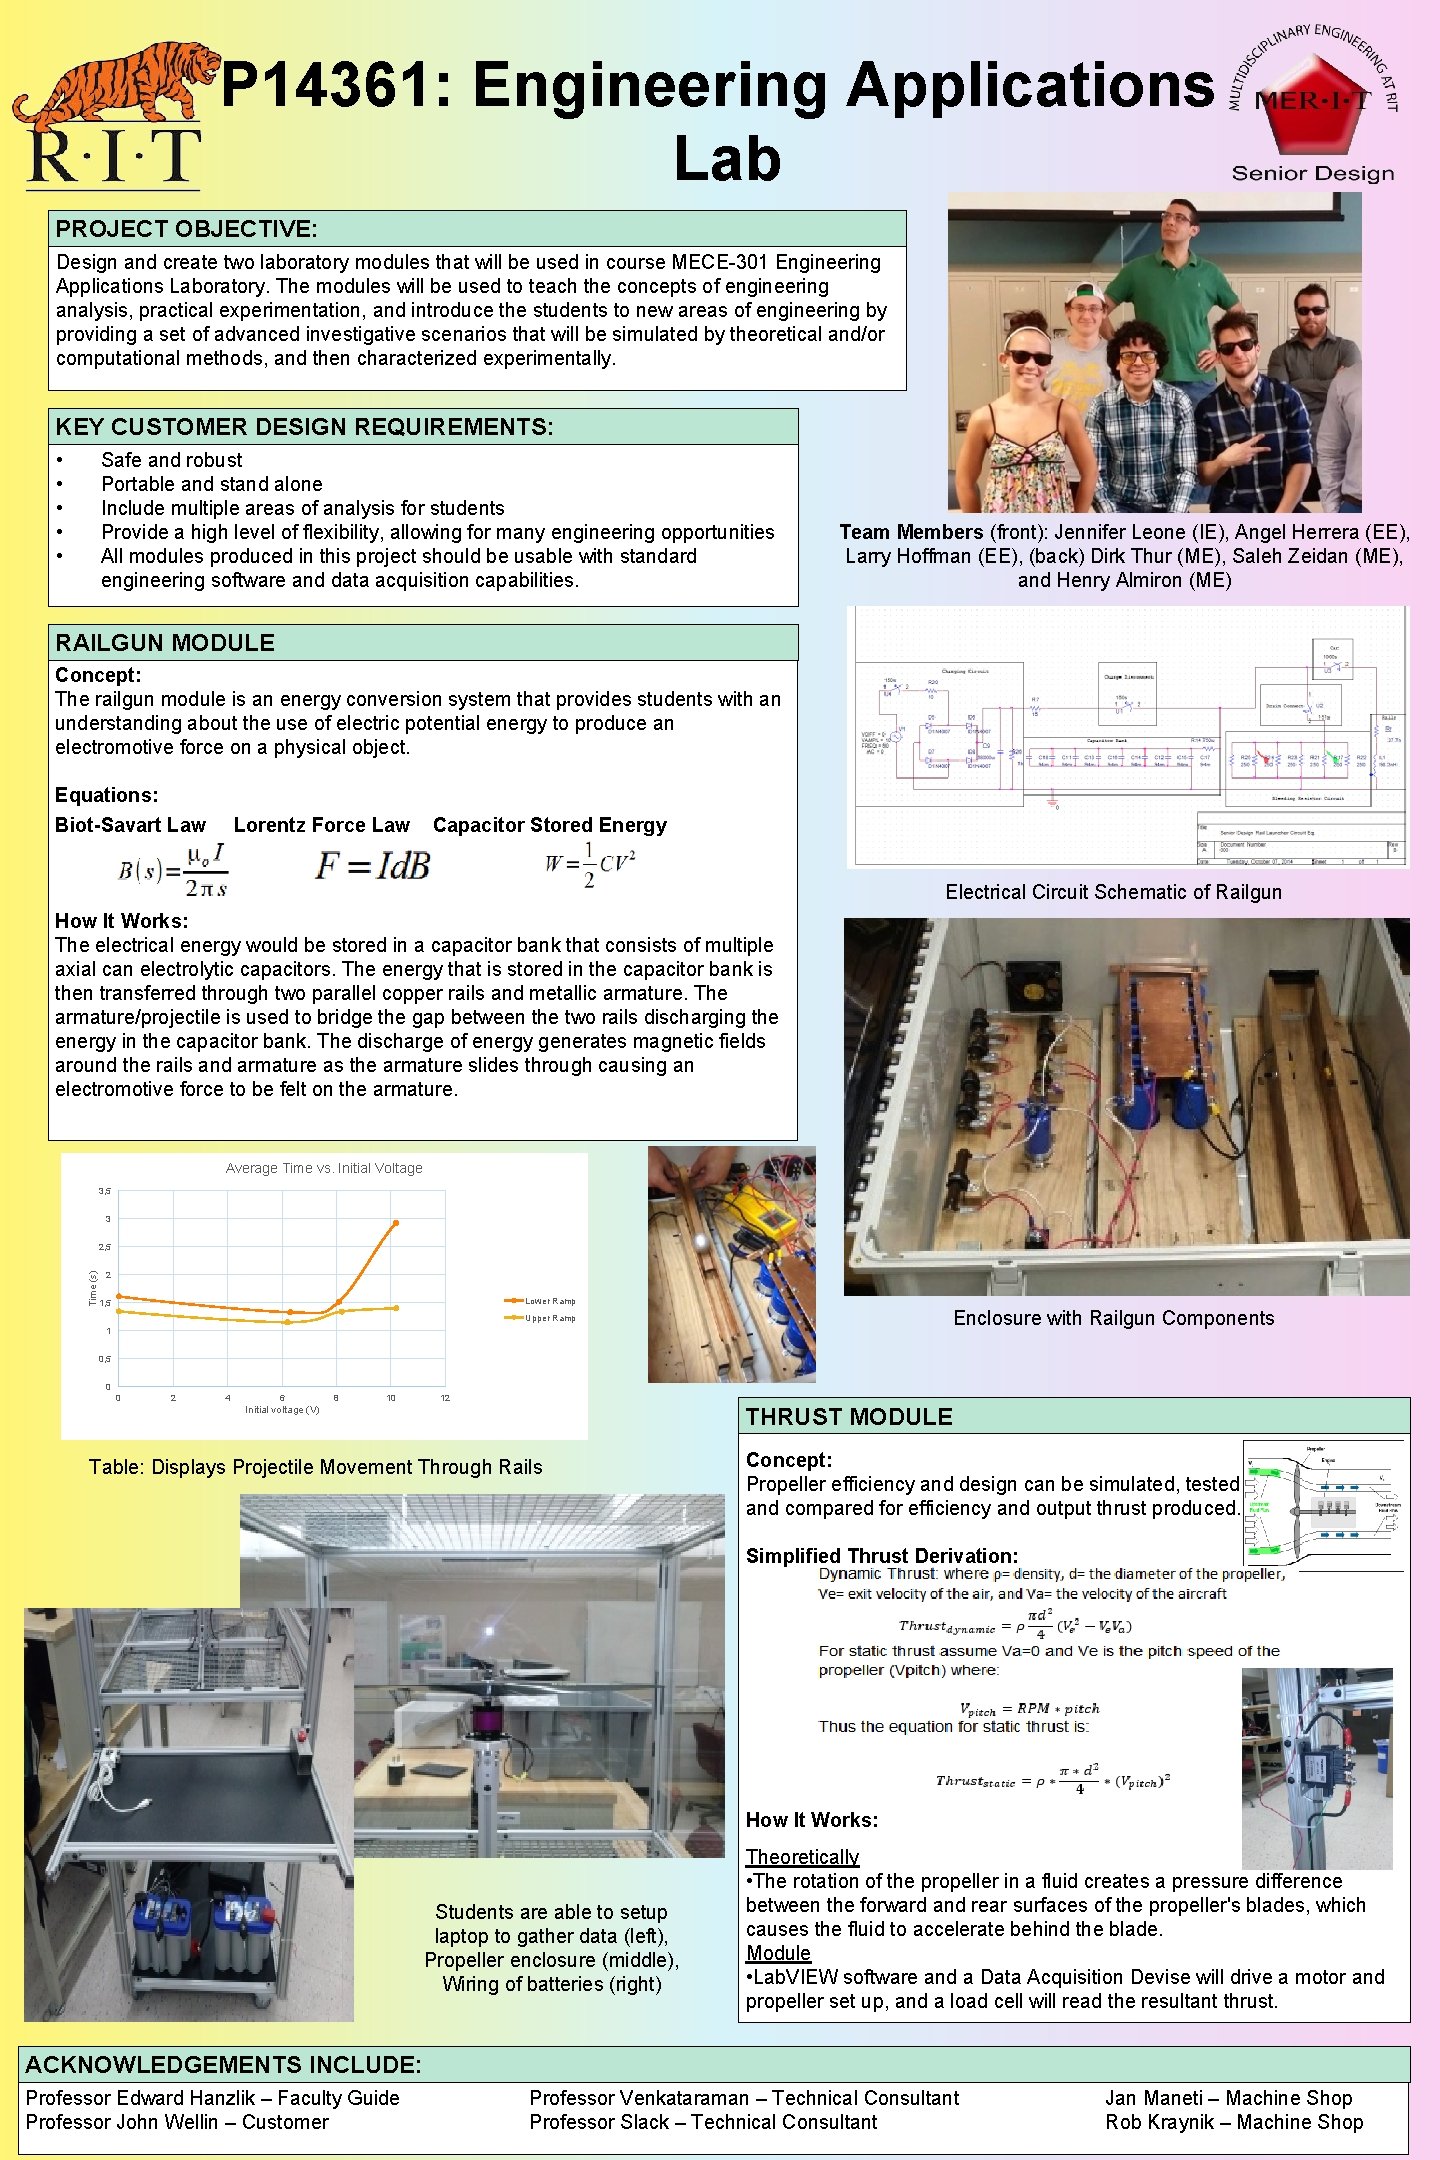 P 14361: Engineering Applications Lab PROJECT OBJECTIVE: Design and create two laboratory modules that